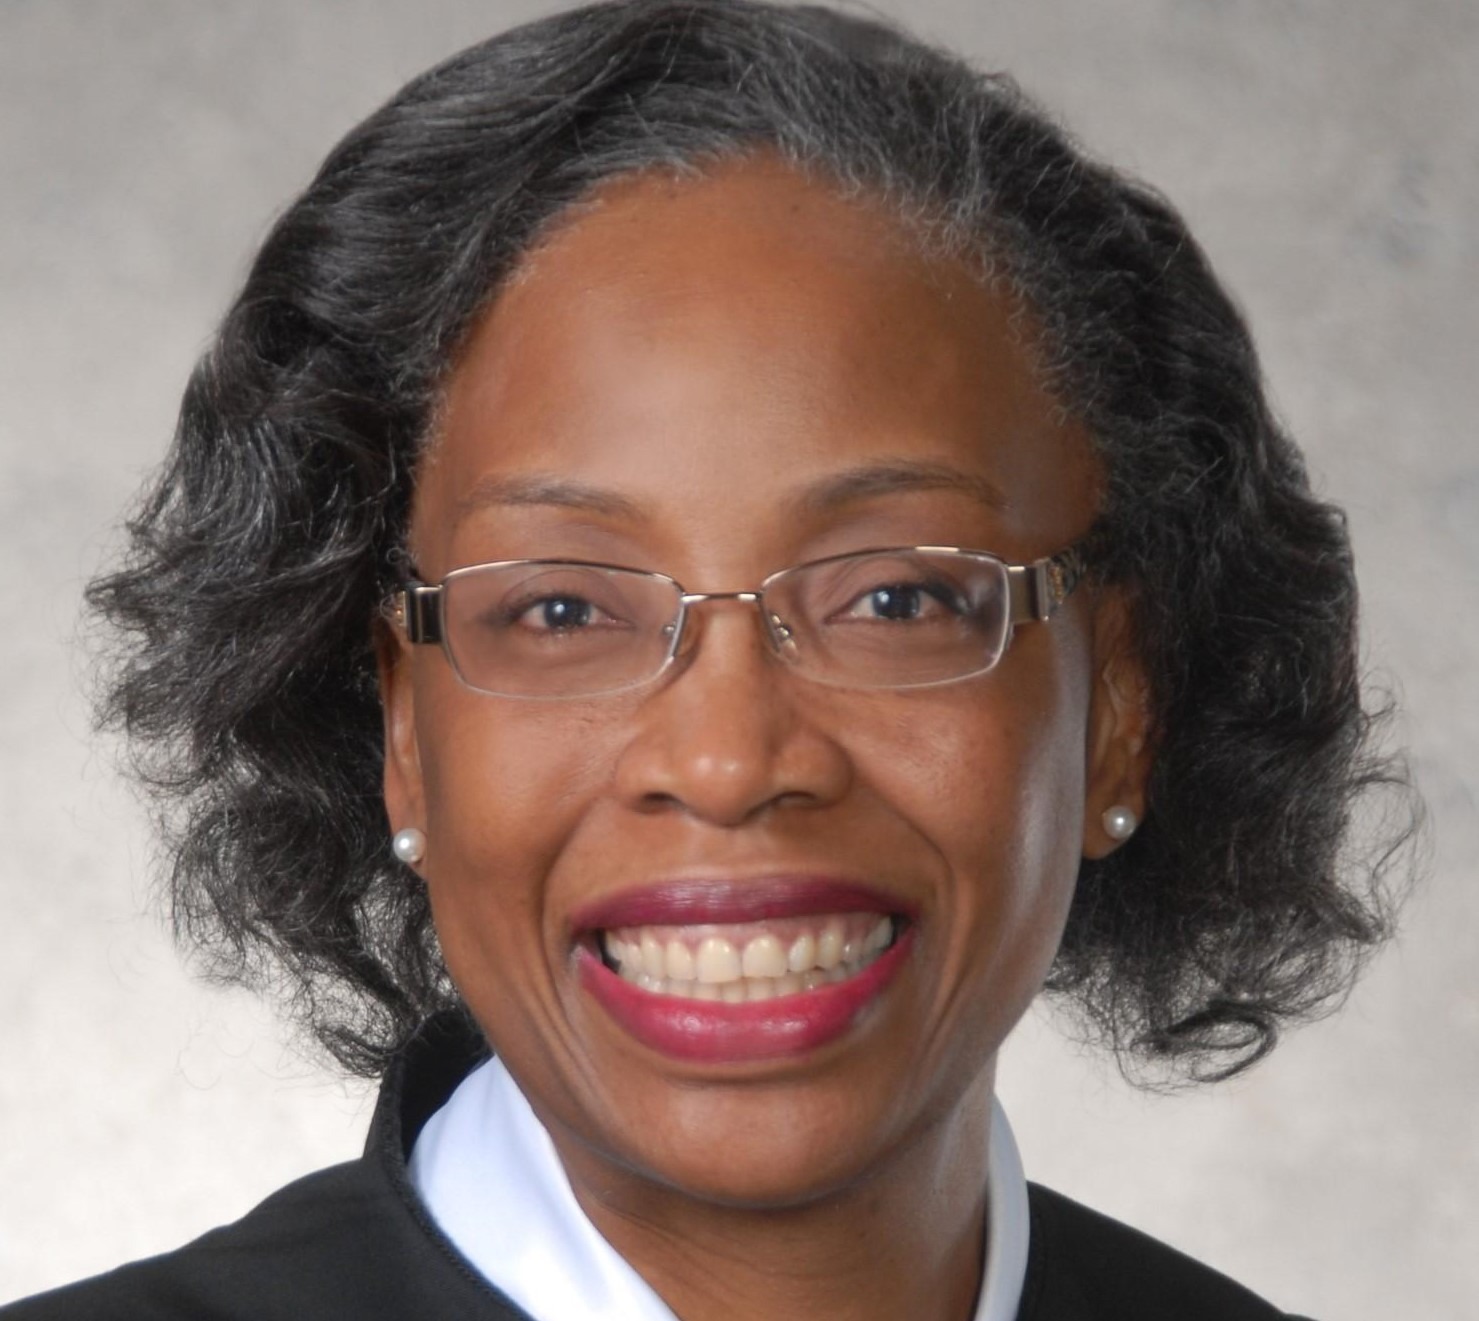 Pierce County Superior Court Judge Helen Whitener has been appointed to an open seat on the Washington Supreme Court.